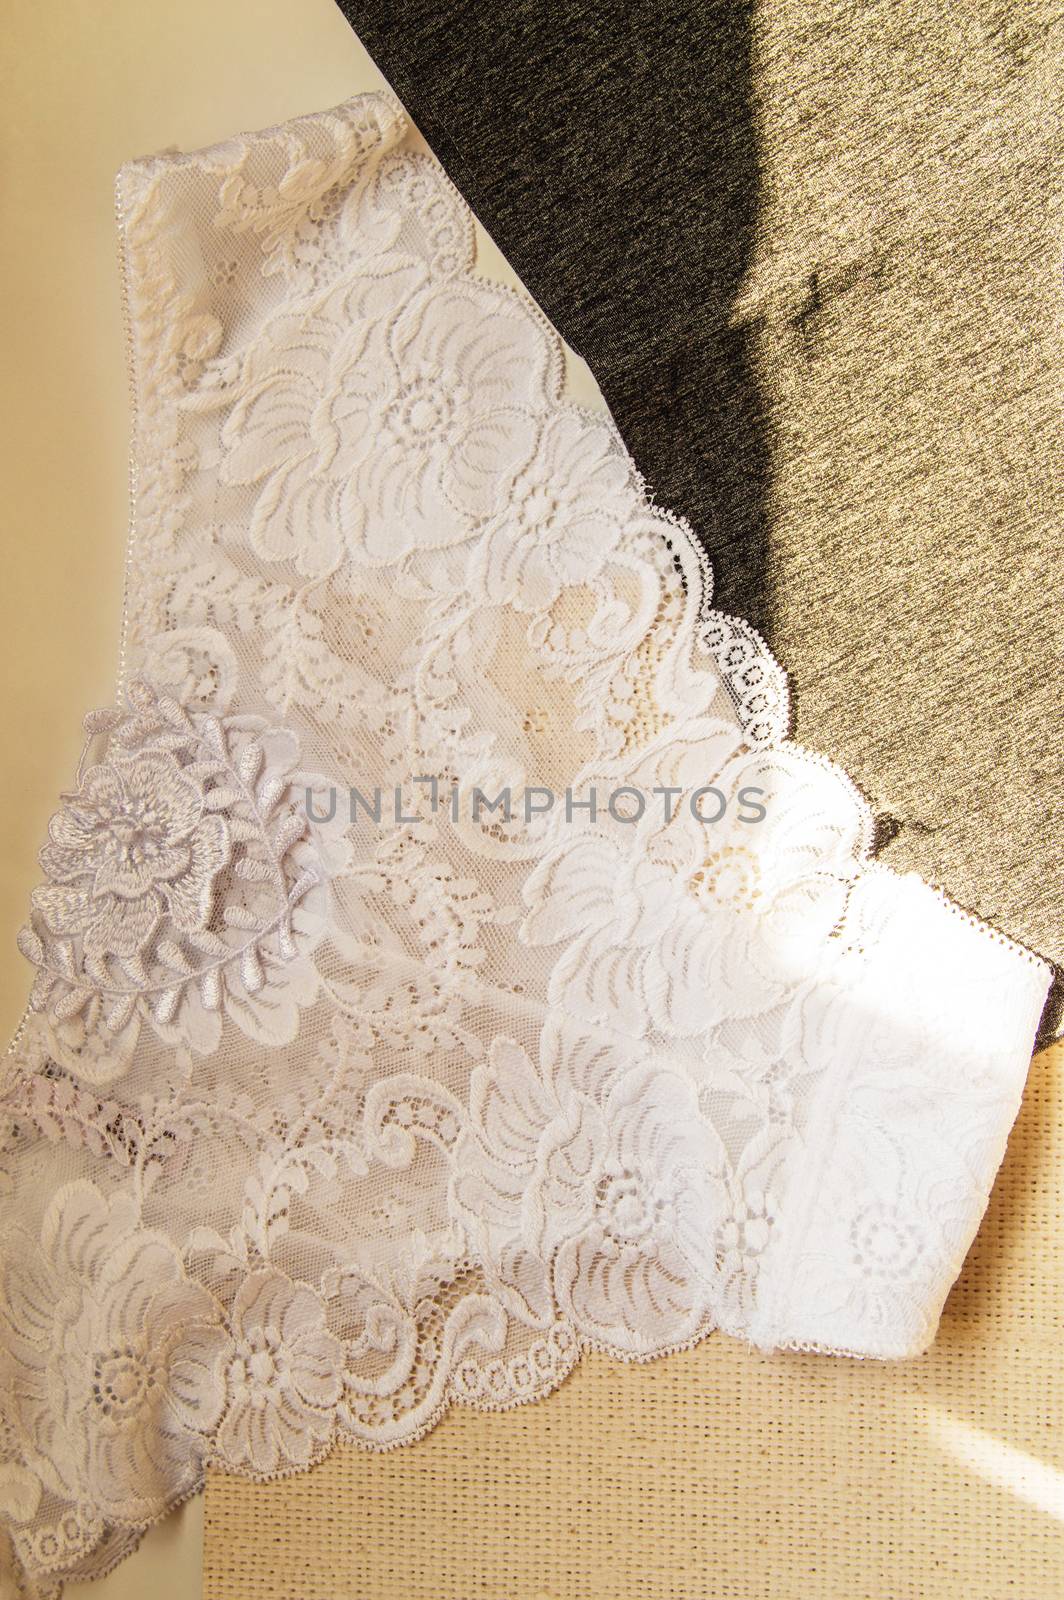 White lace sexy women's panties against the bright sunlight. Vertical shot, top view, flat lay.